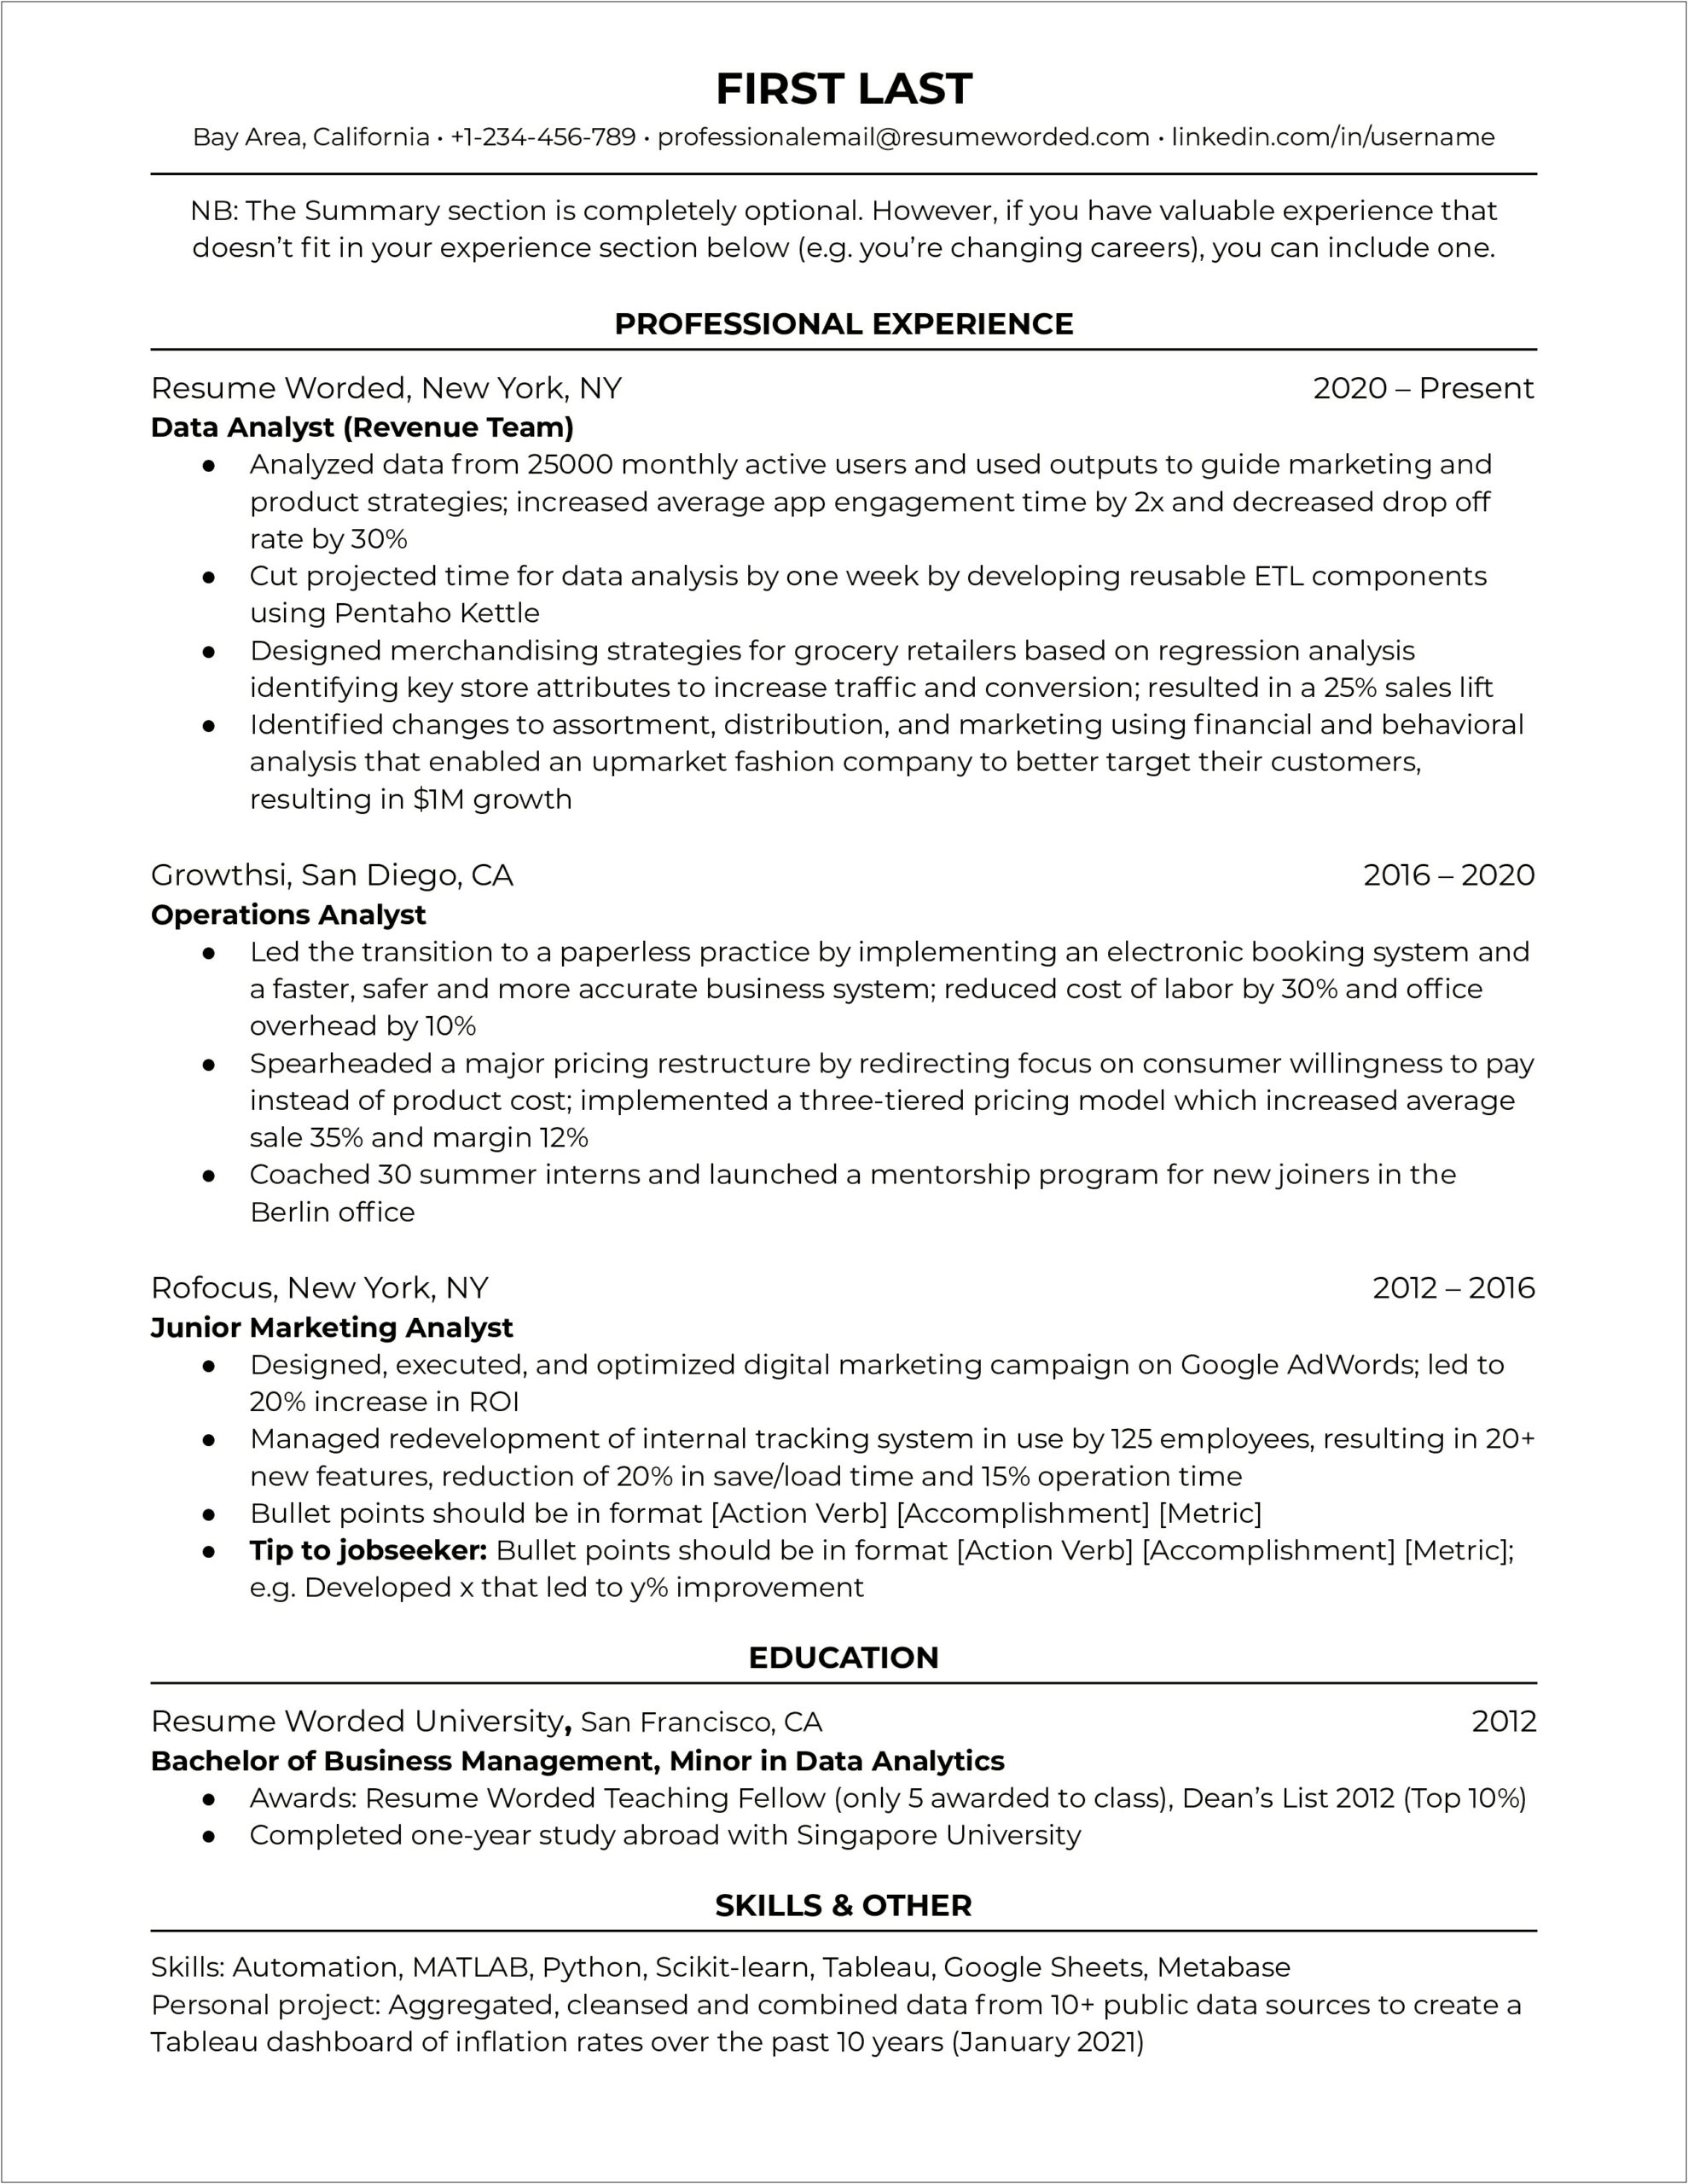 Listing Work Experience On A Resume Linkedin